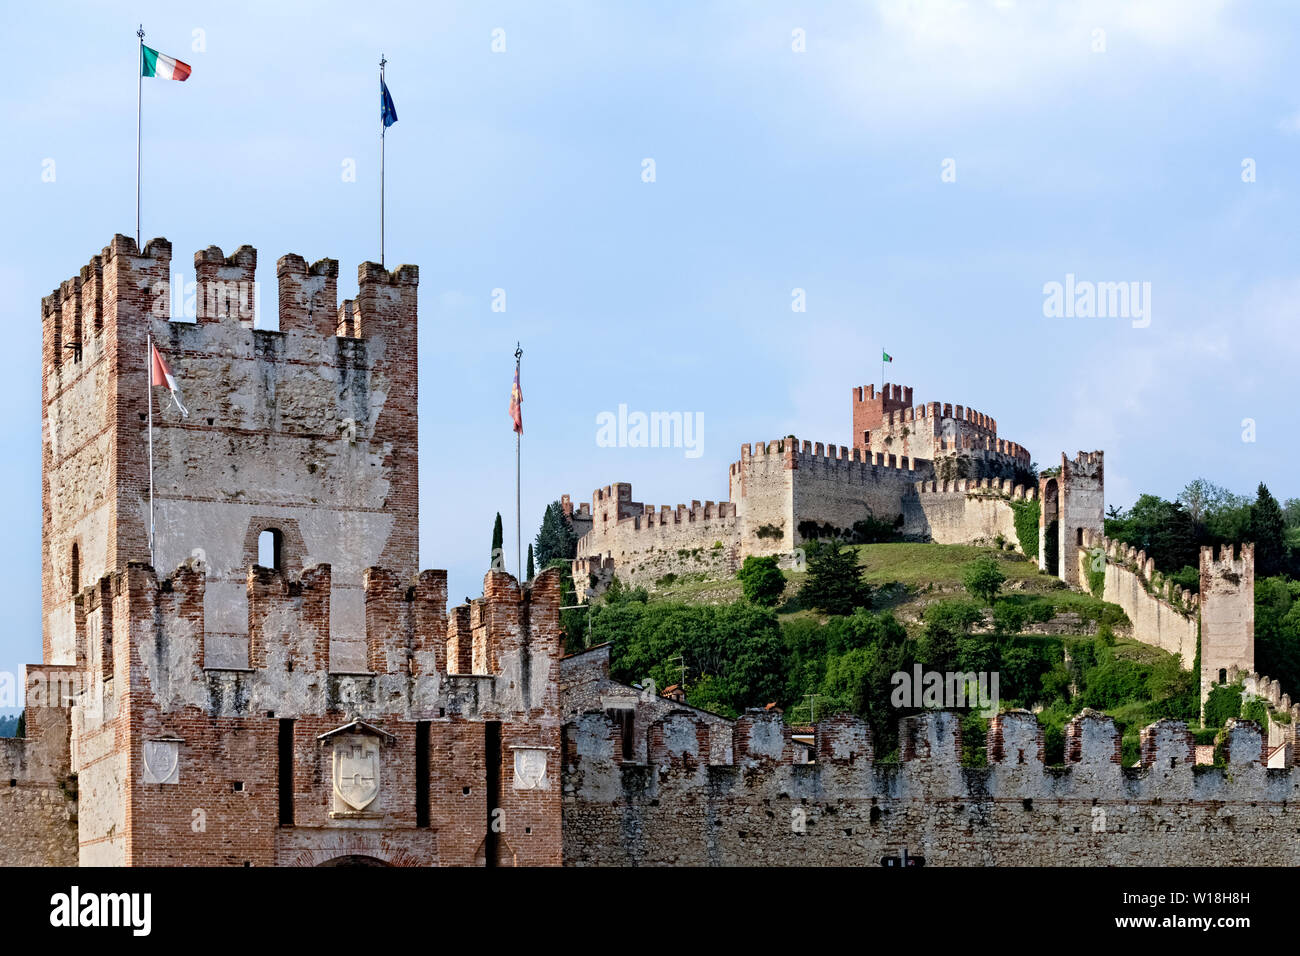 The Scaligero castle of Soave is one of the largest medieval buildings in northern Italy. Verona province, Veneto, Italy, Europe. Stock Photo